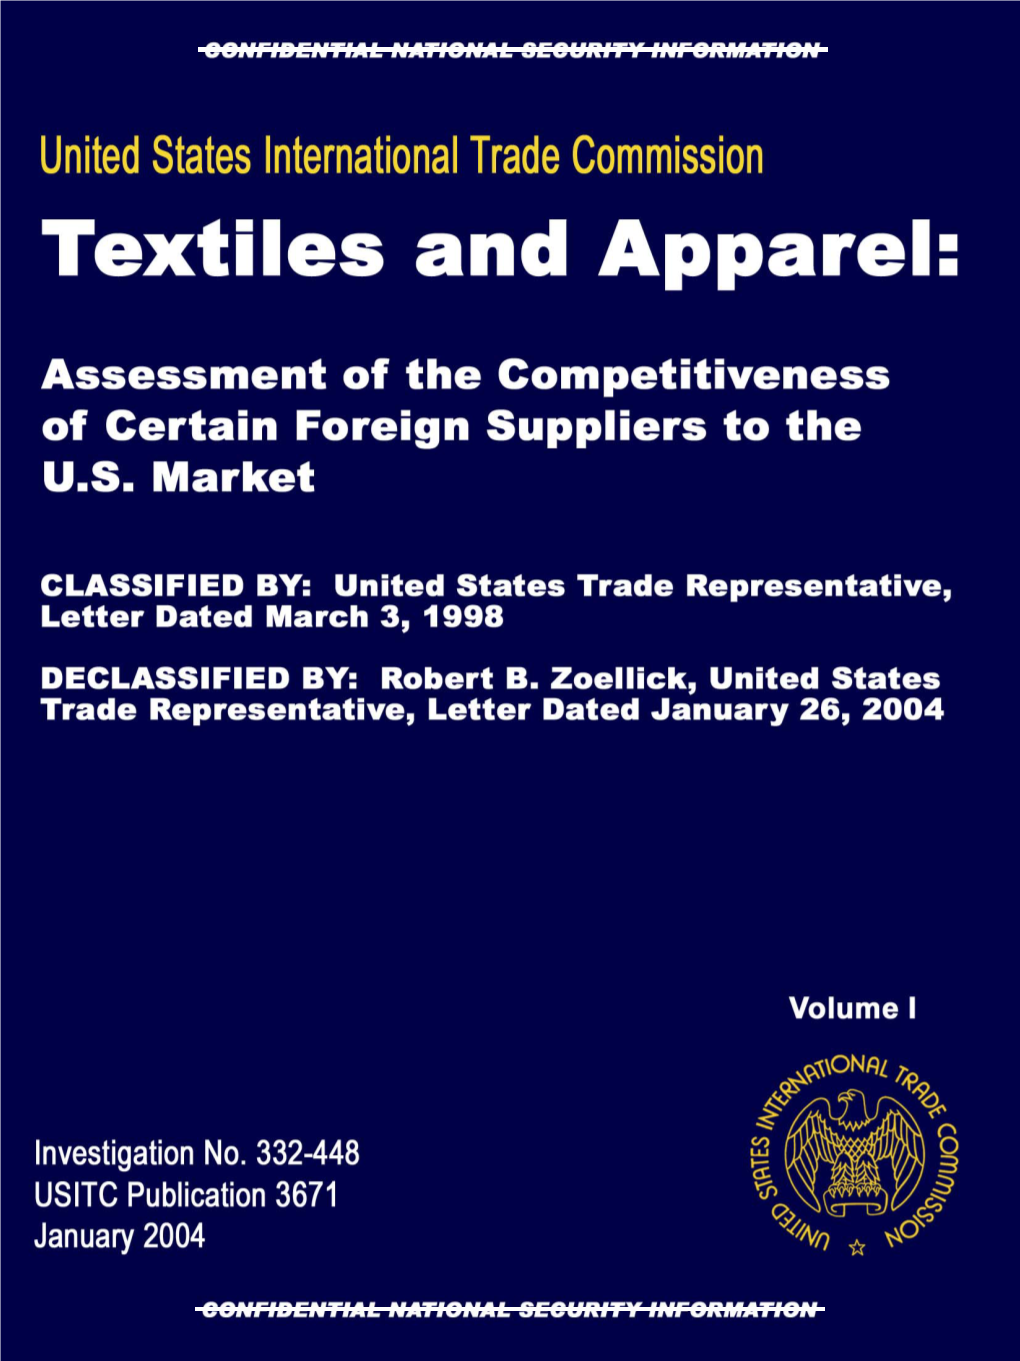 Textiles and Apparel: Assessment of the Competitiveness of Certain Foreign Suppliers to the U.S